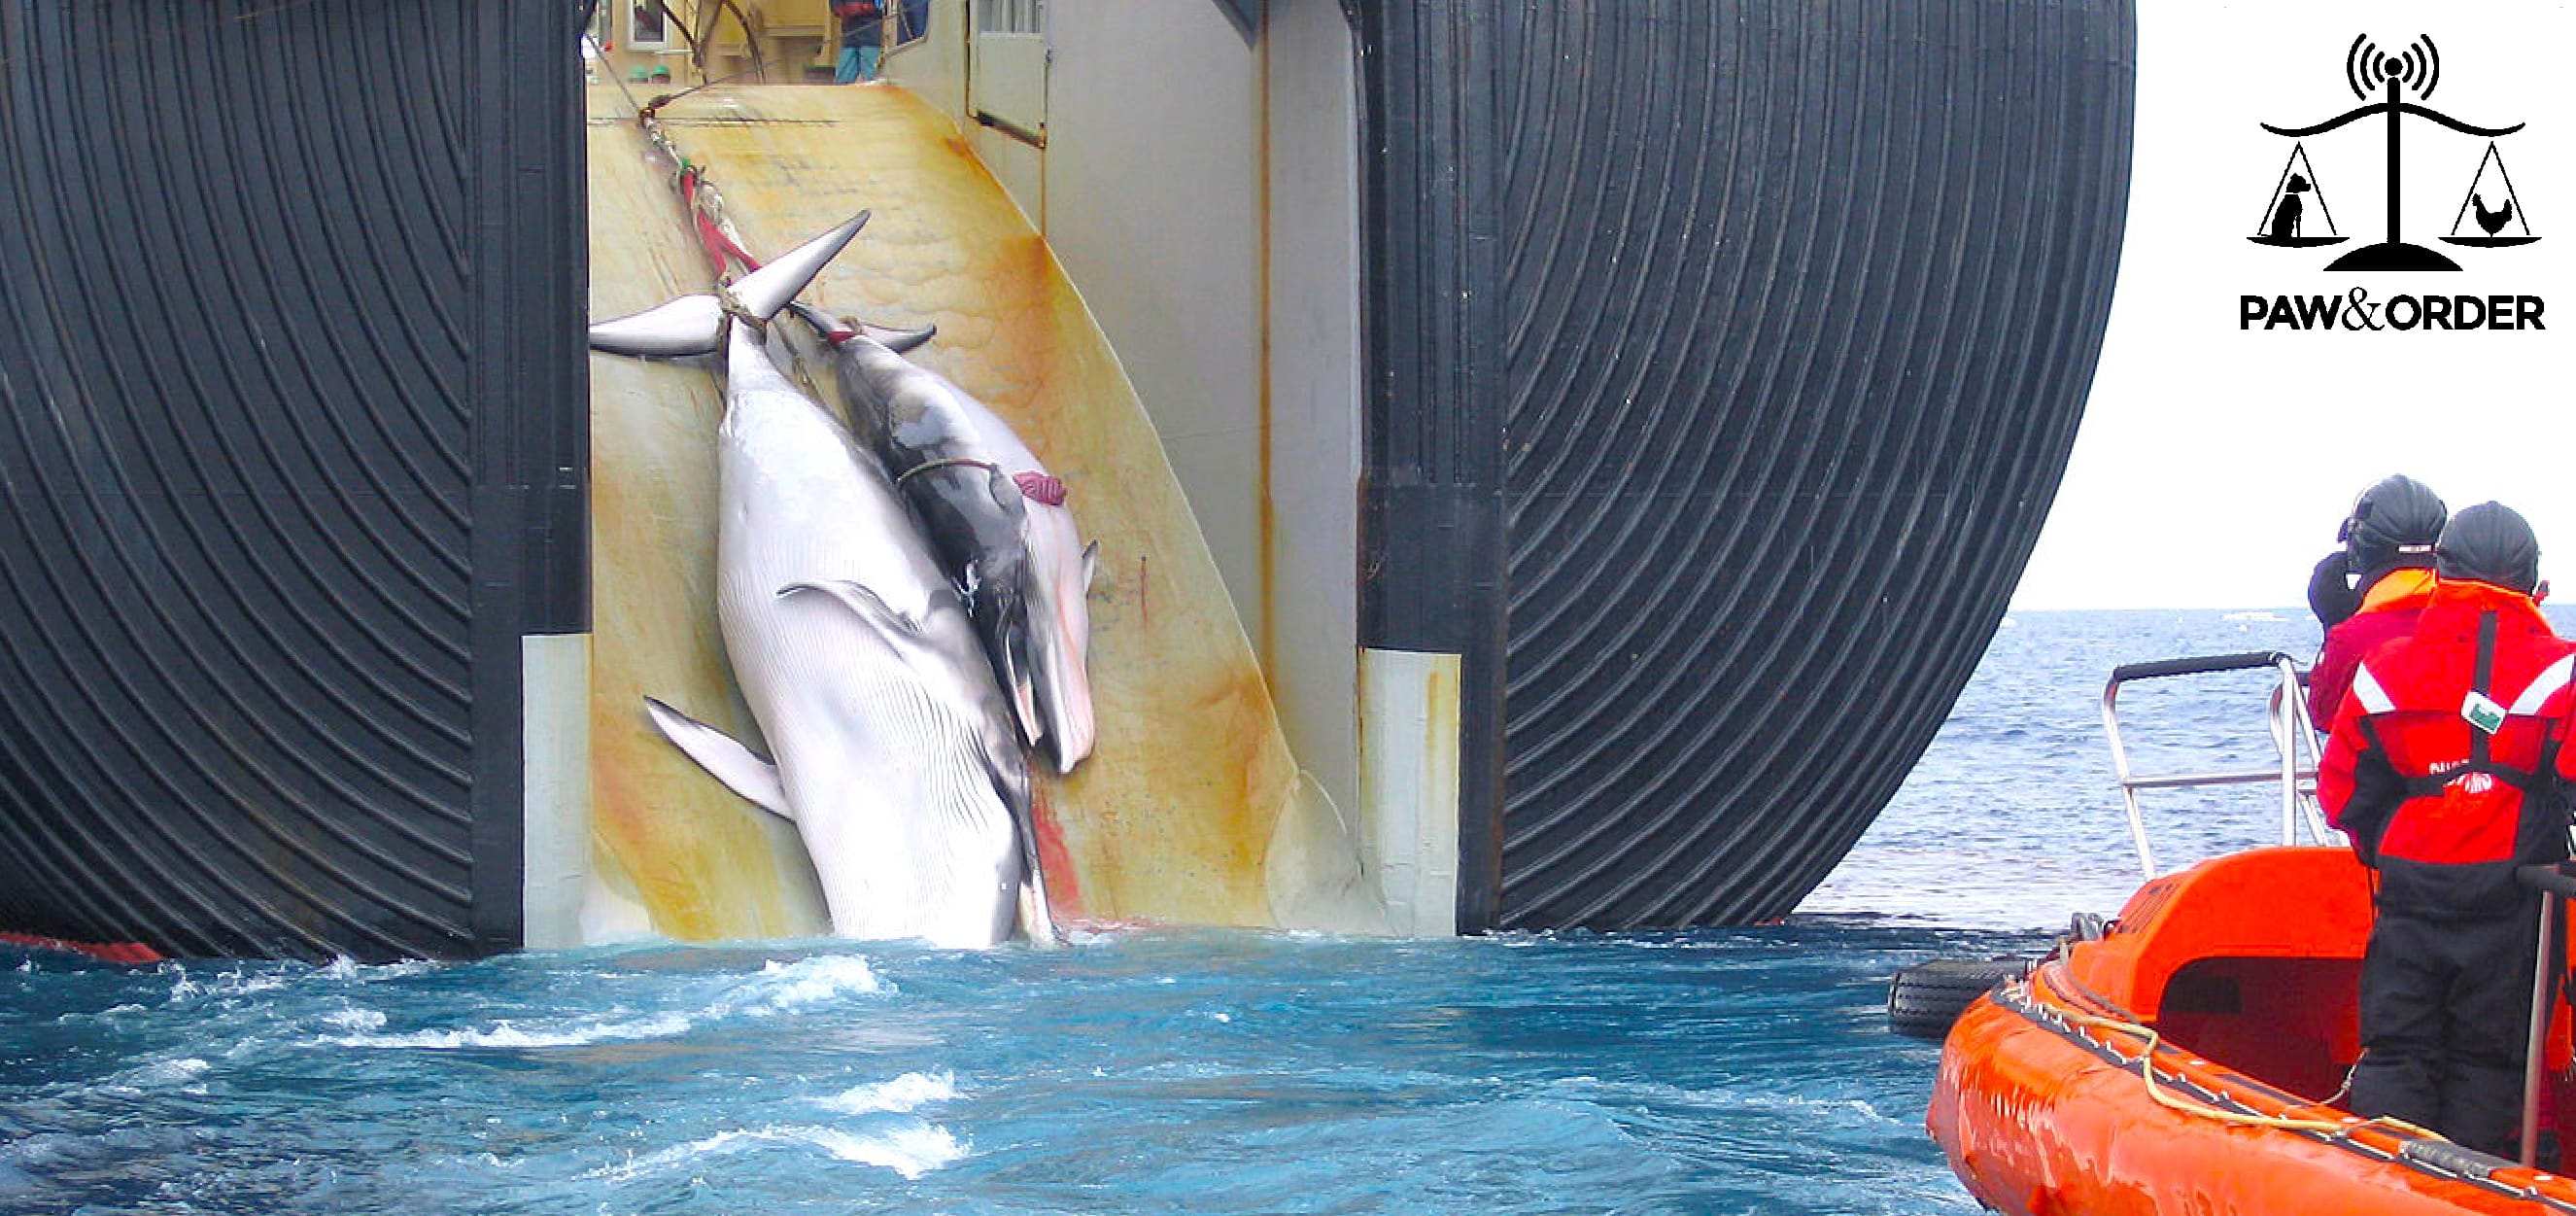 Episode 25: Japan Leaves International Whaling Commission to Harpoon More Whales